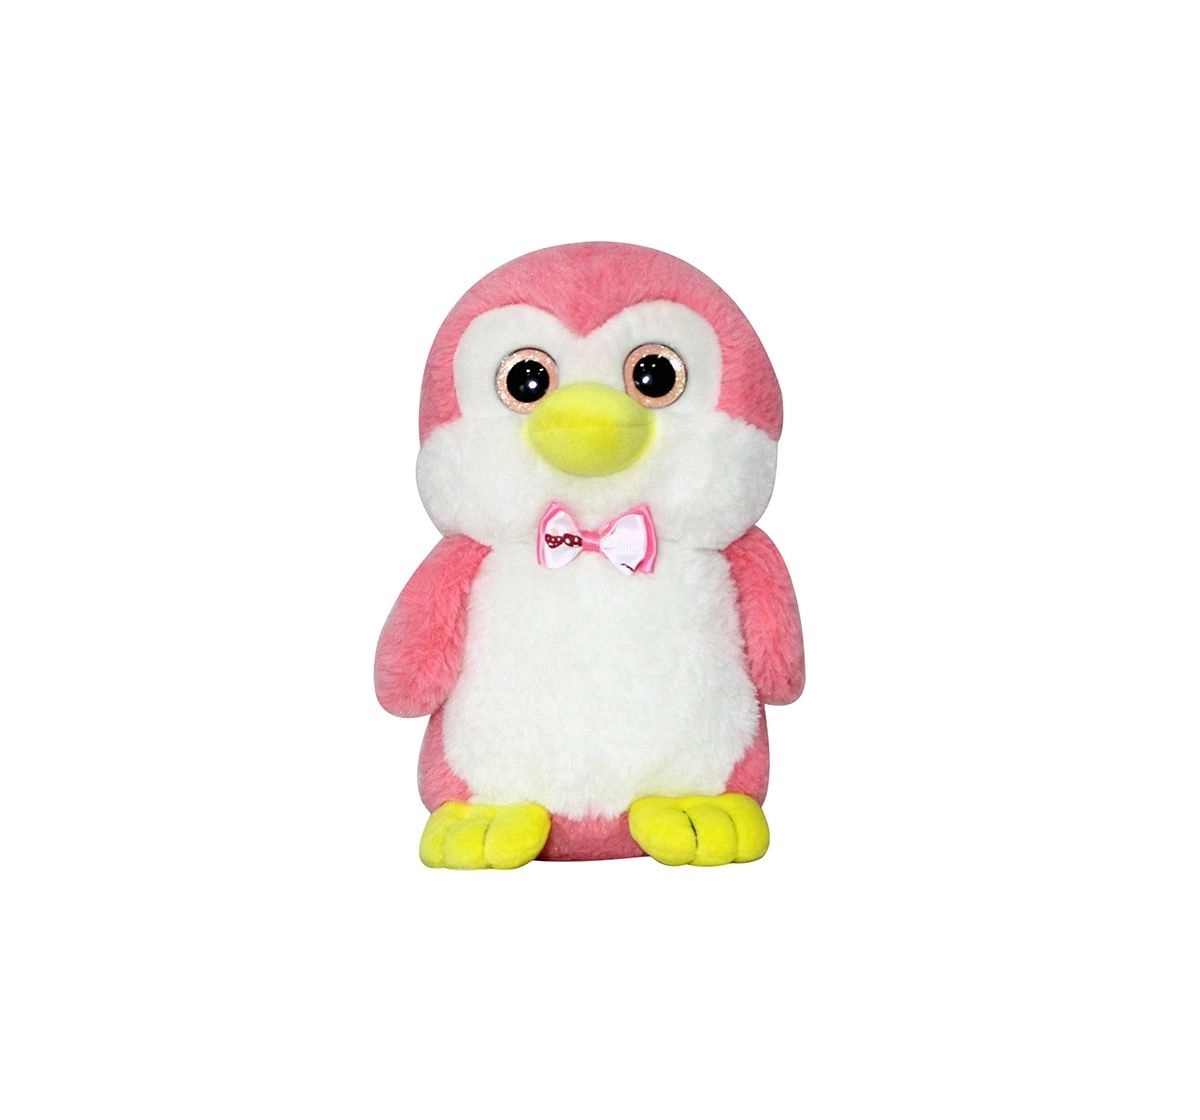 Softbuddies Pink Penguin Quirky Soft Toys for Kids age 3Y+ - 24 Cm (Pink)